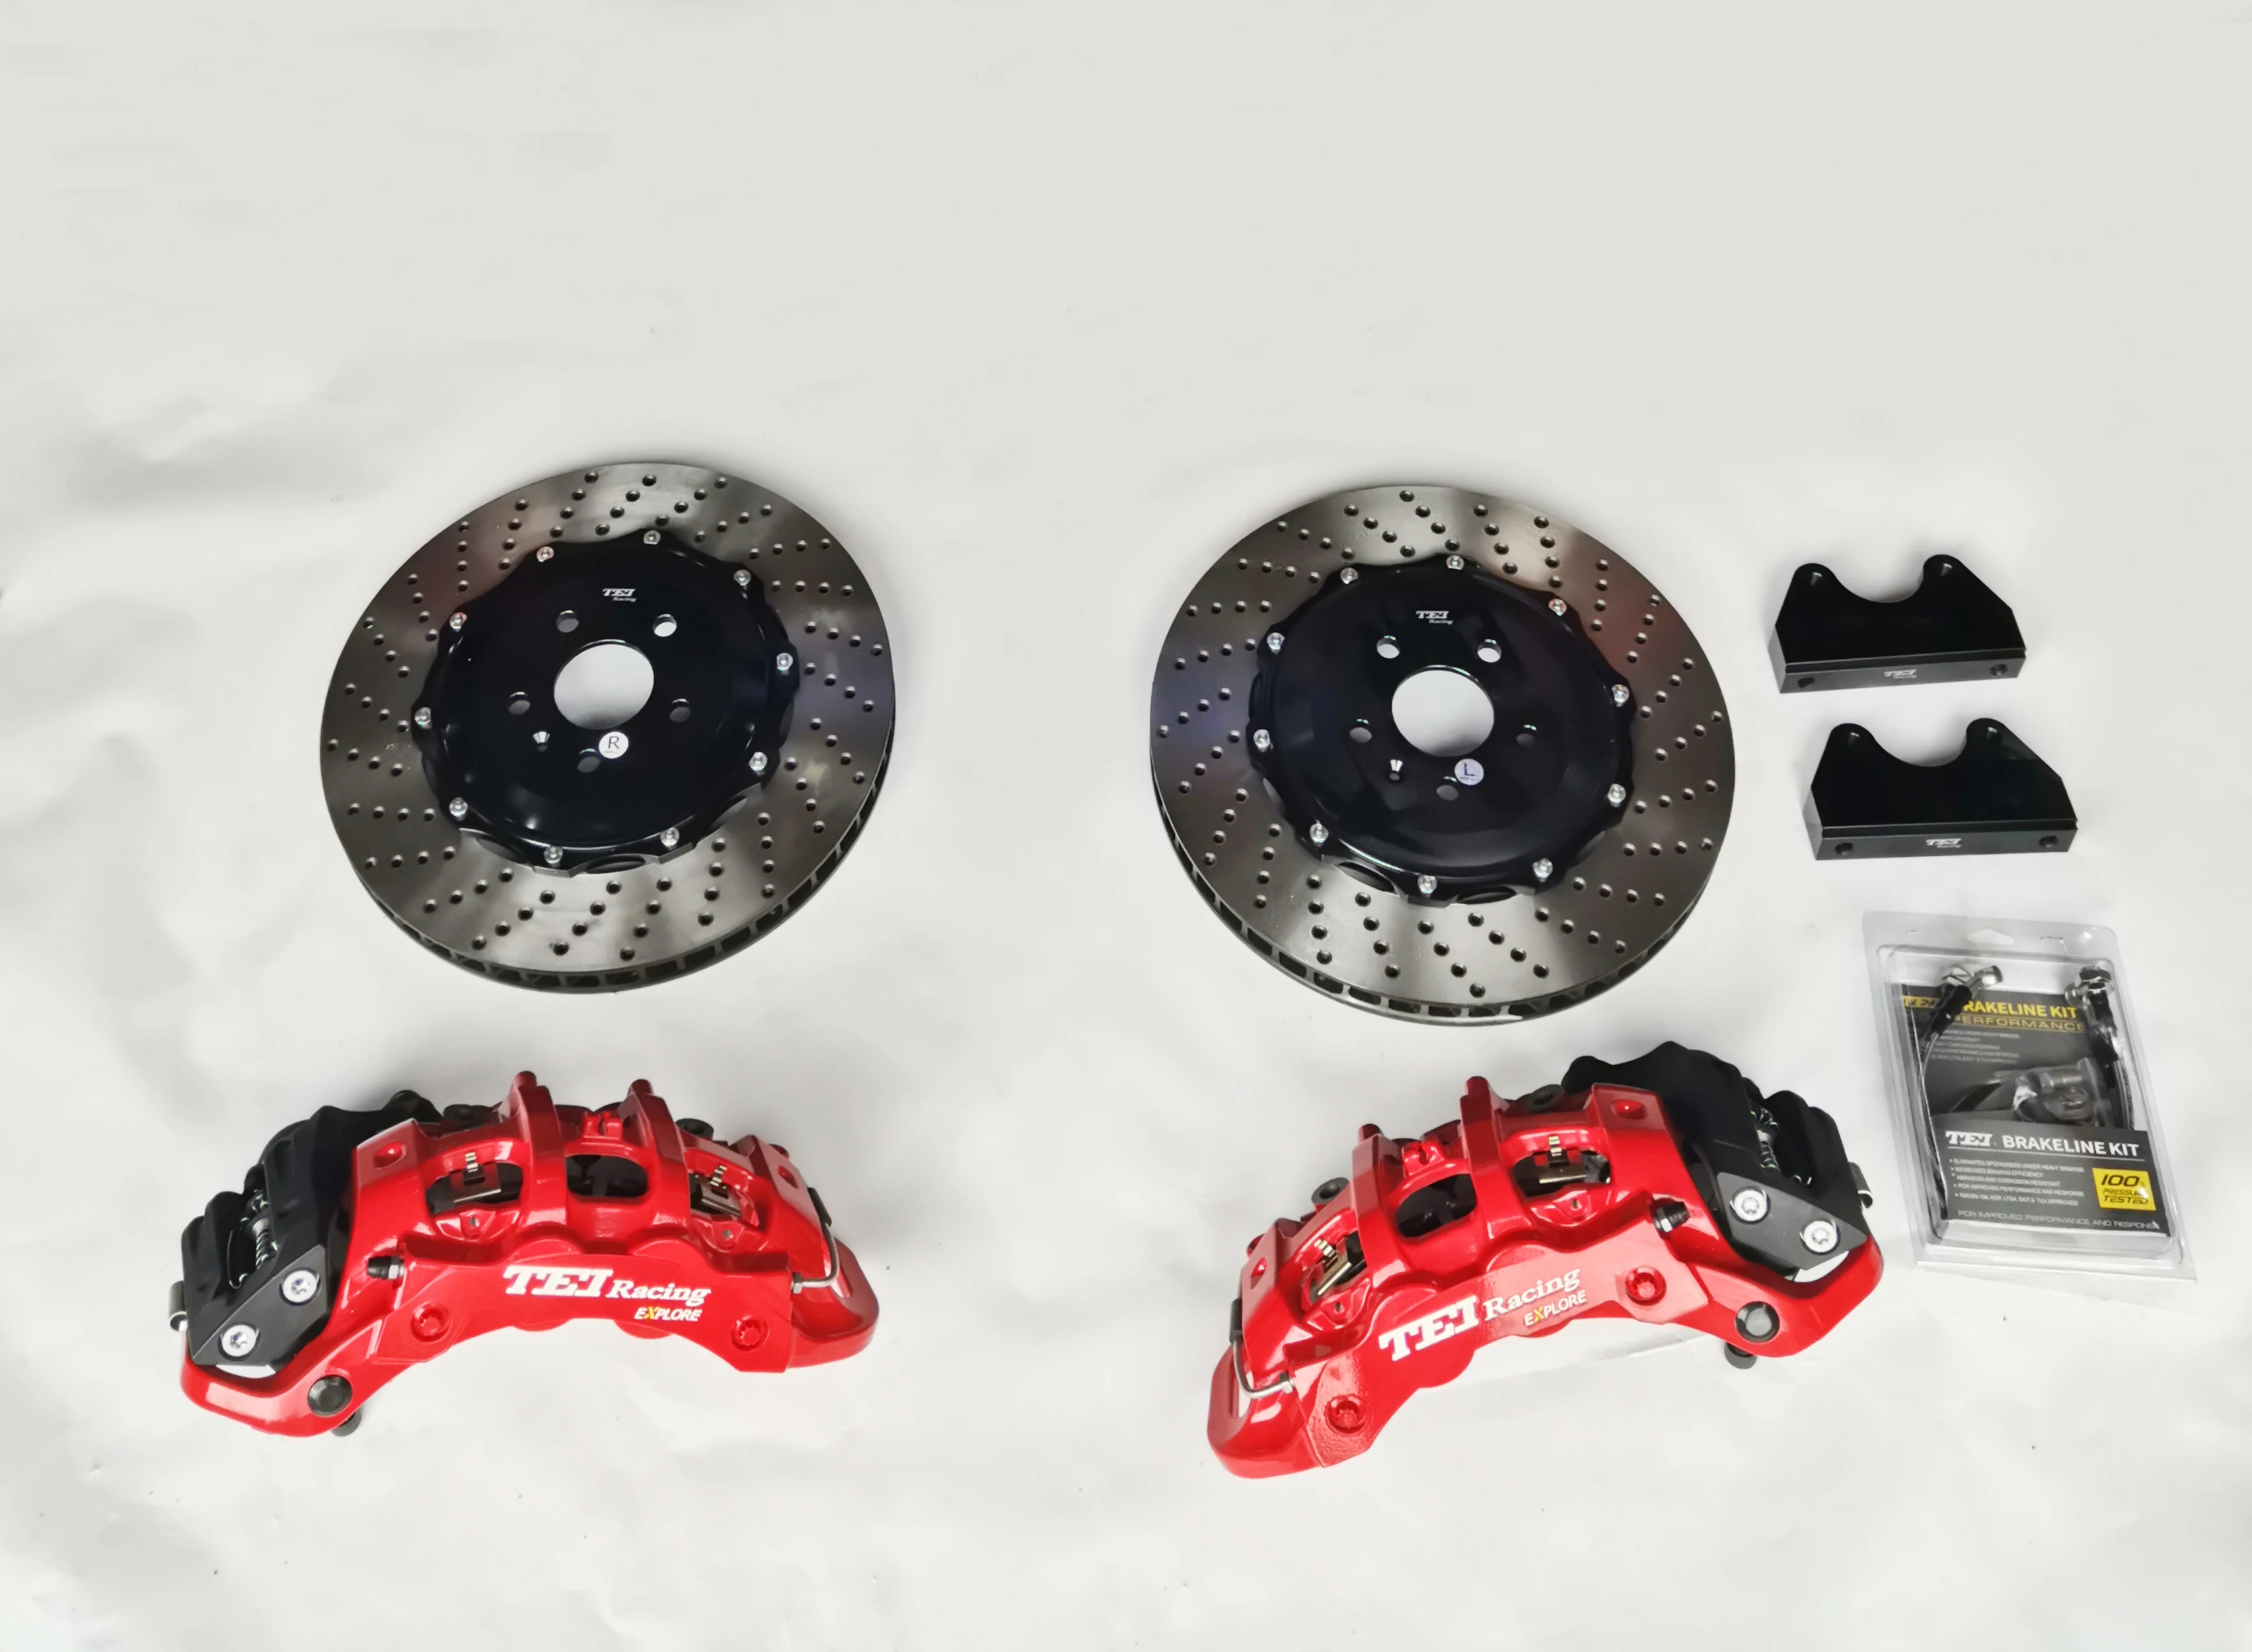 2 5 Lug Rotors 4 Ceramic Pads Performance Kit Calipers + CCK12065 REAR Powder Coated Red 2 Quiet Low Dust 